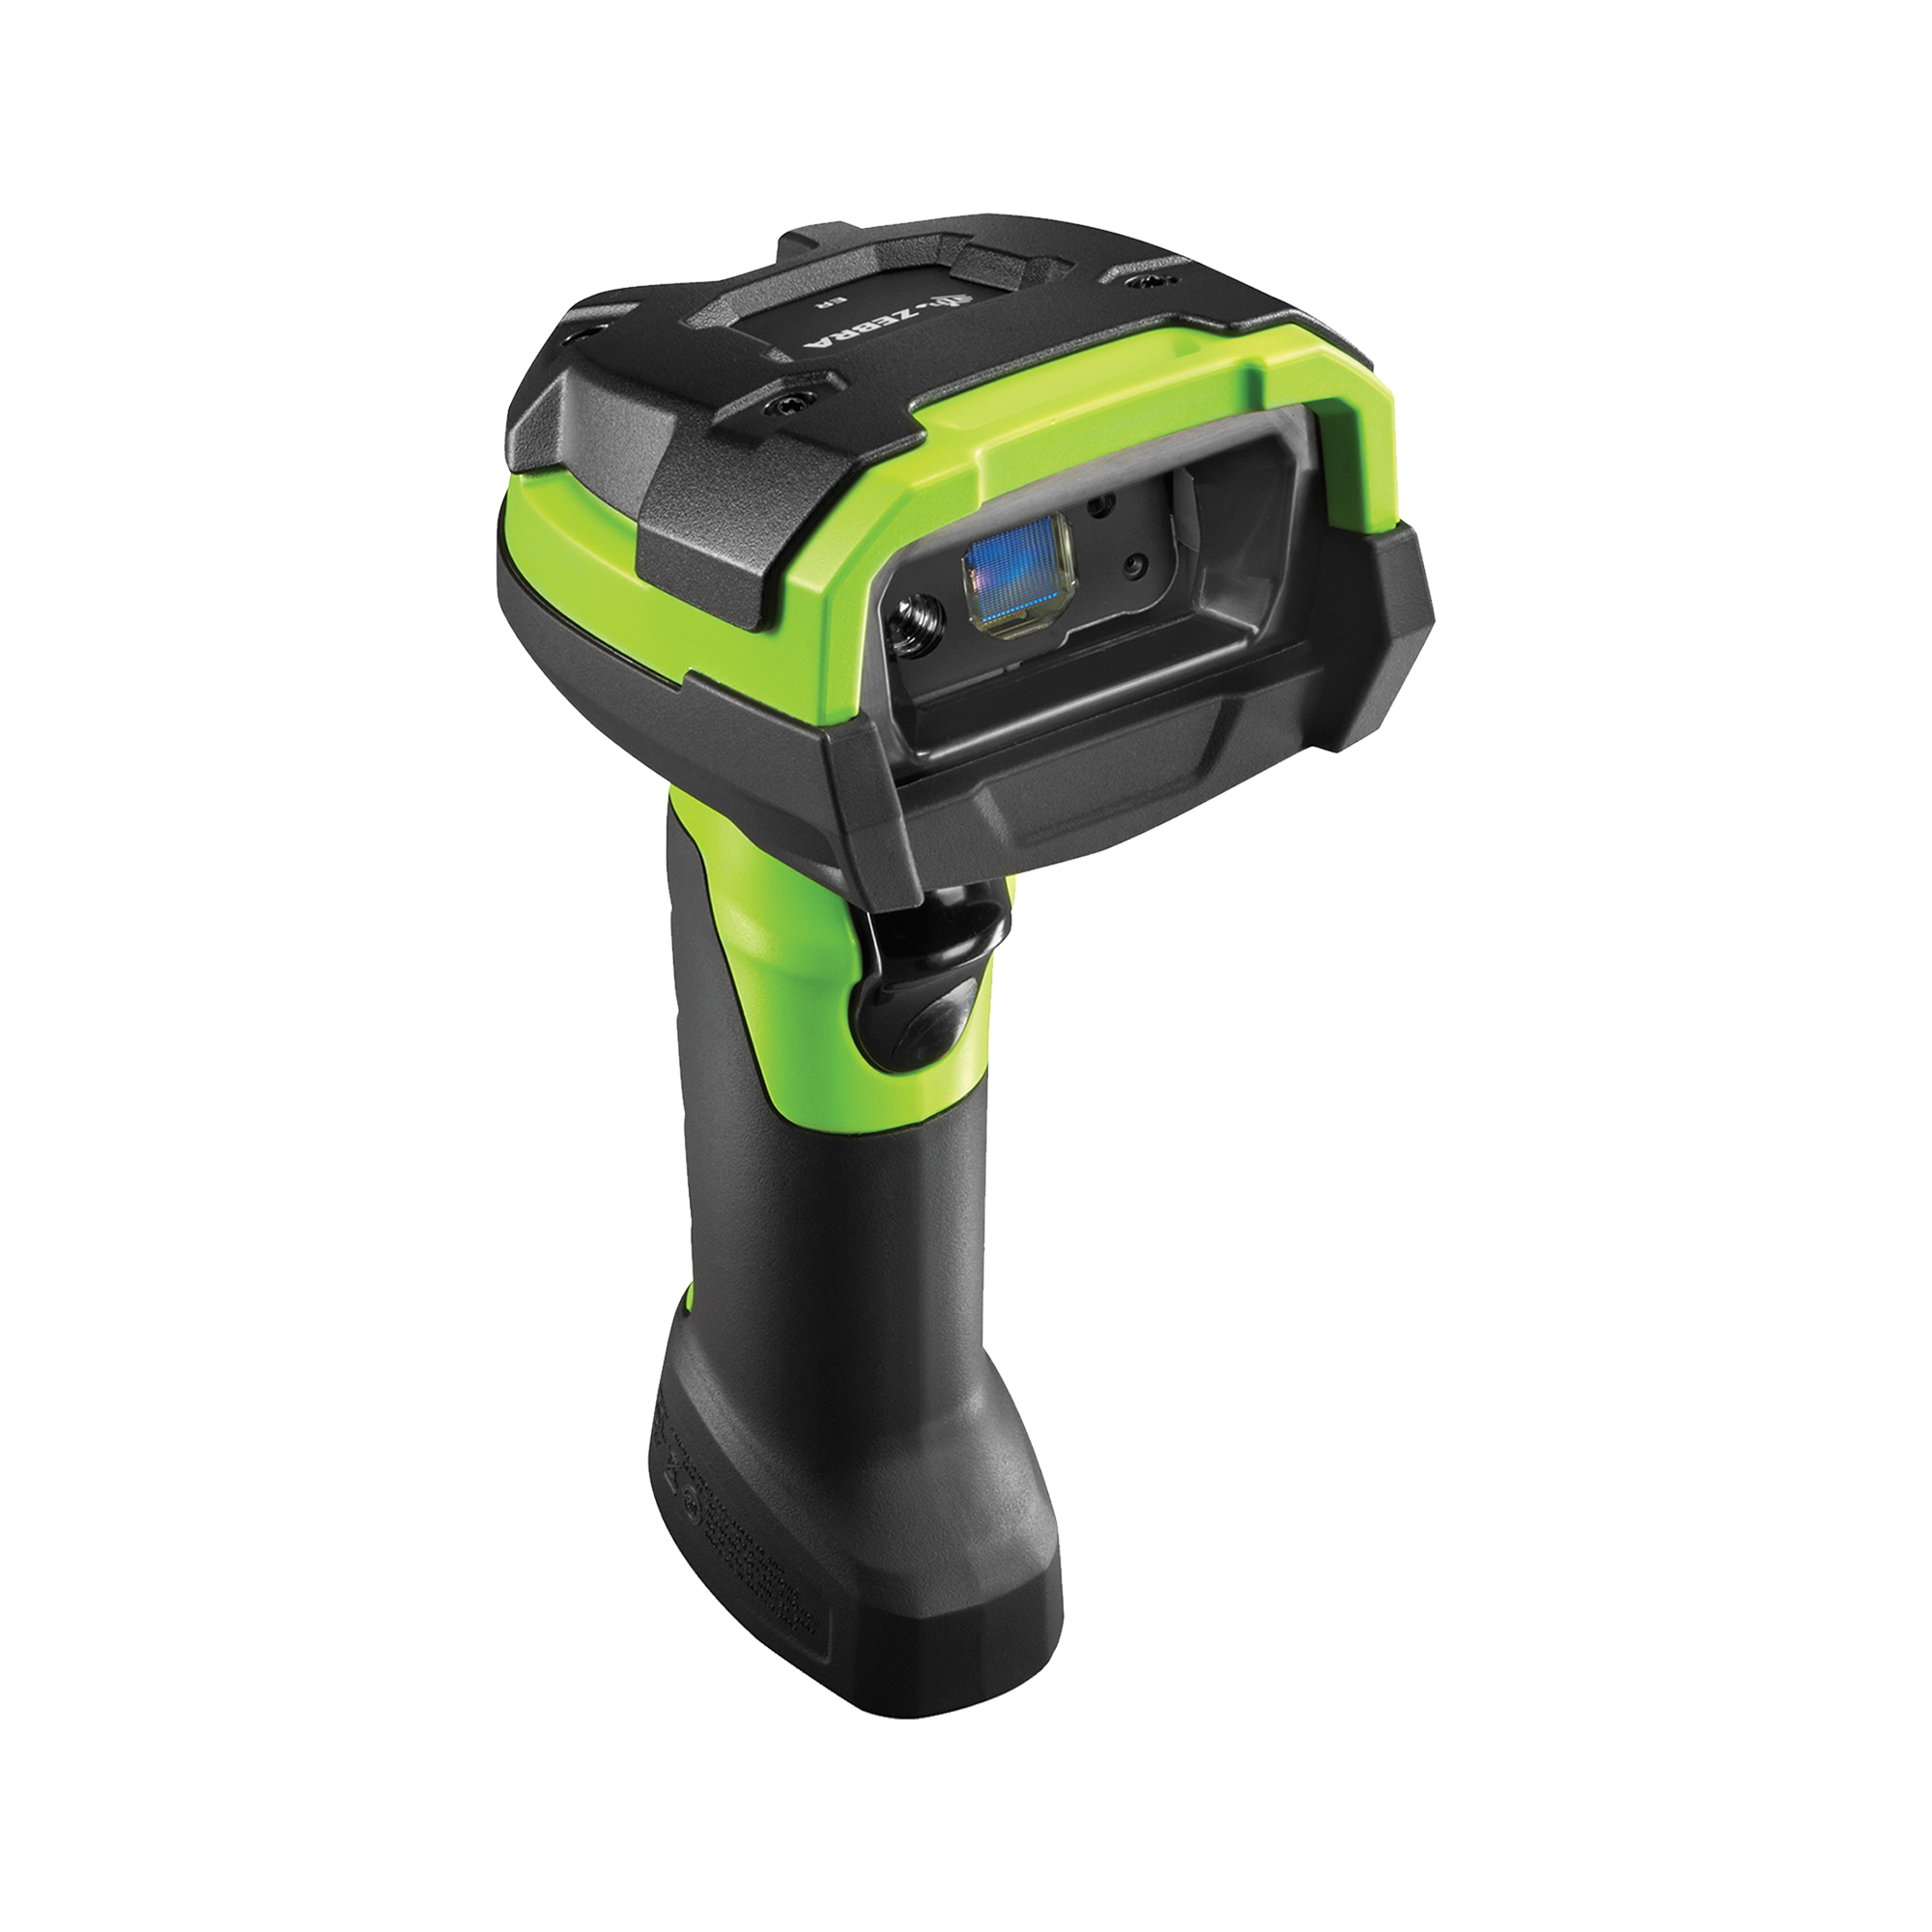 Zebra Rugged, Area Imager, High Performance, Corded, Industrial Green, Vibration Motor